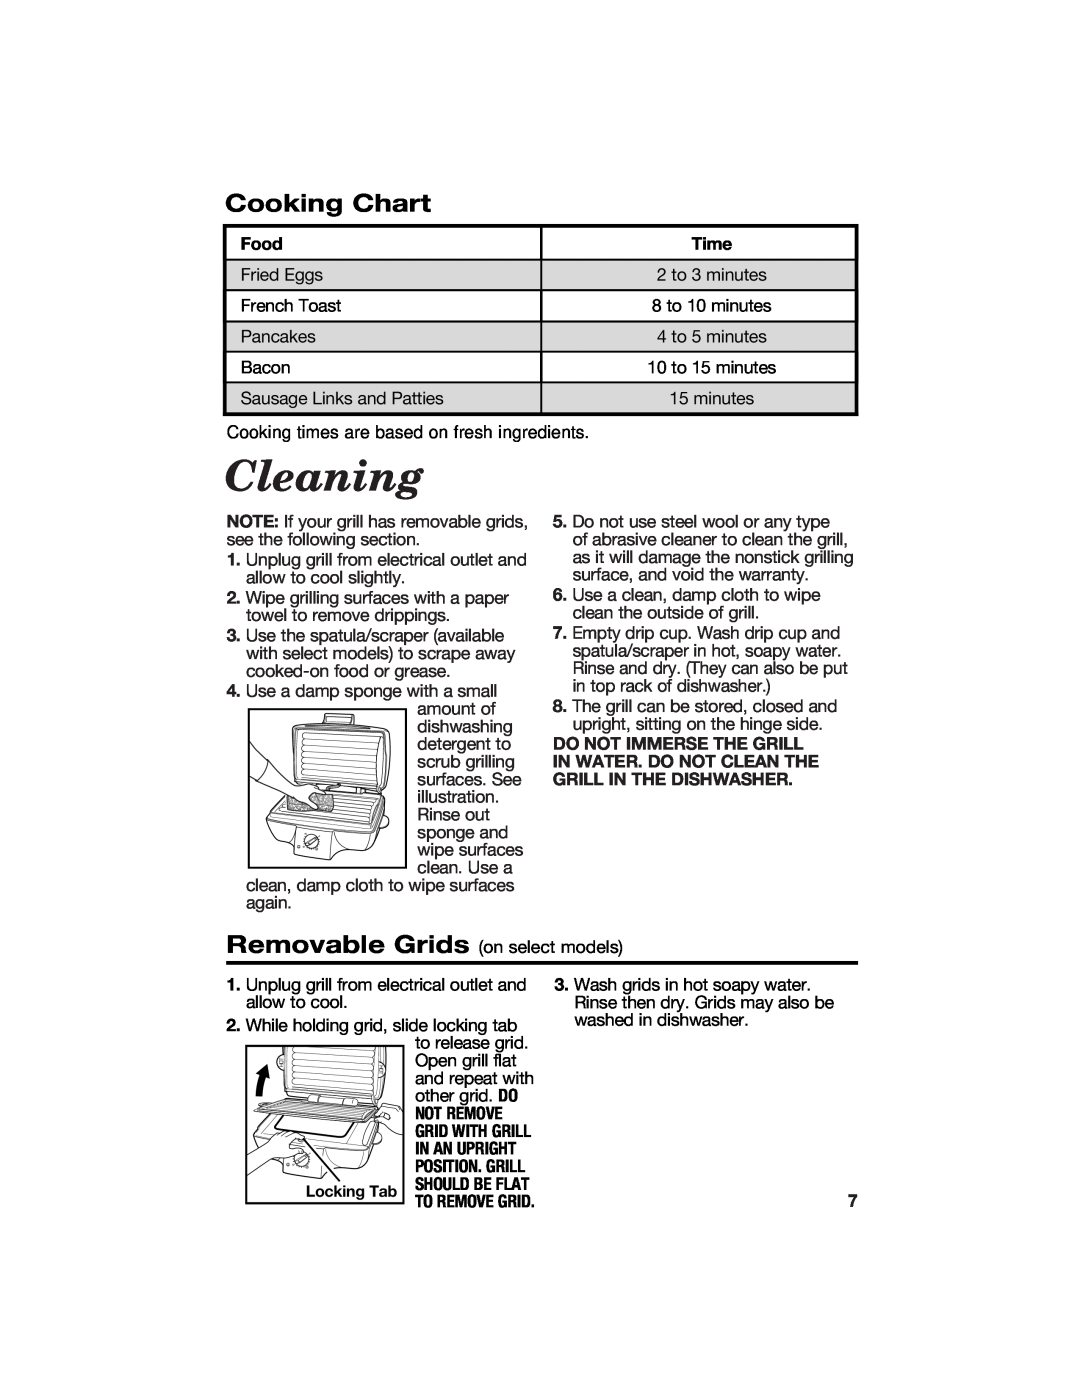 Hamilton Beach 840135600 manual Cleaning, Cooking Chart, Food, Time, Not Remove, In An Upright, To Remove Grid 